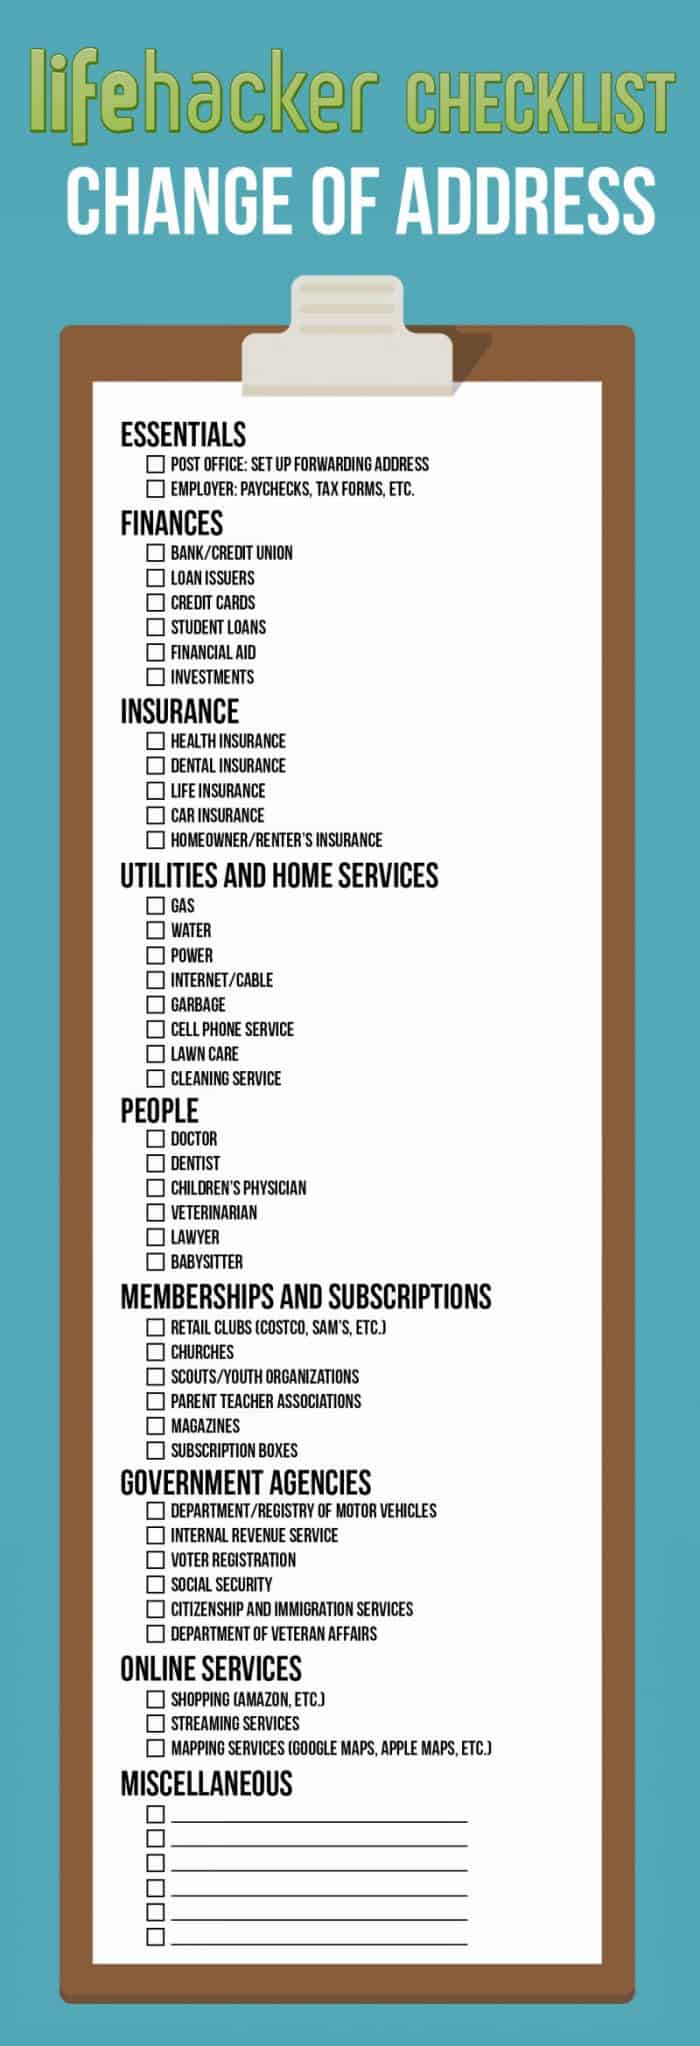 You Guide to Changing Your Address Infographic